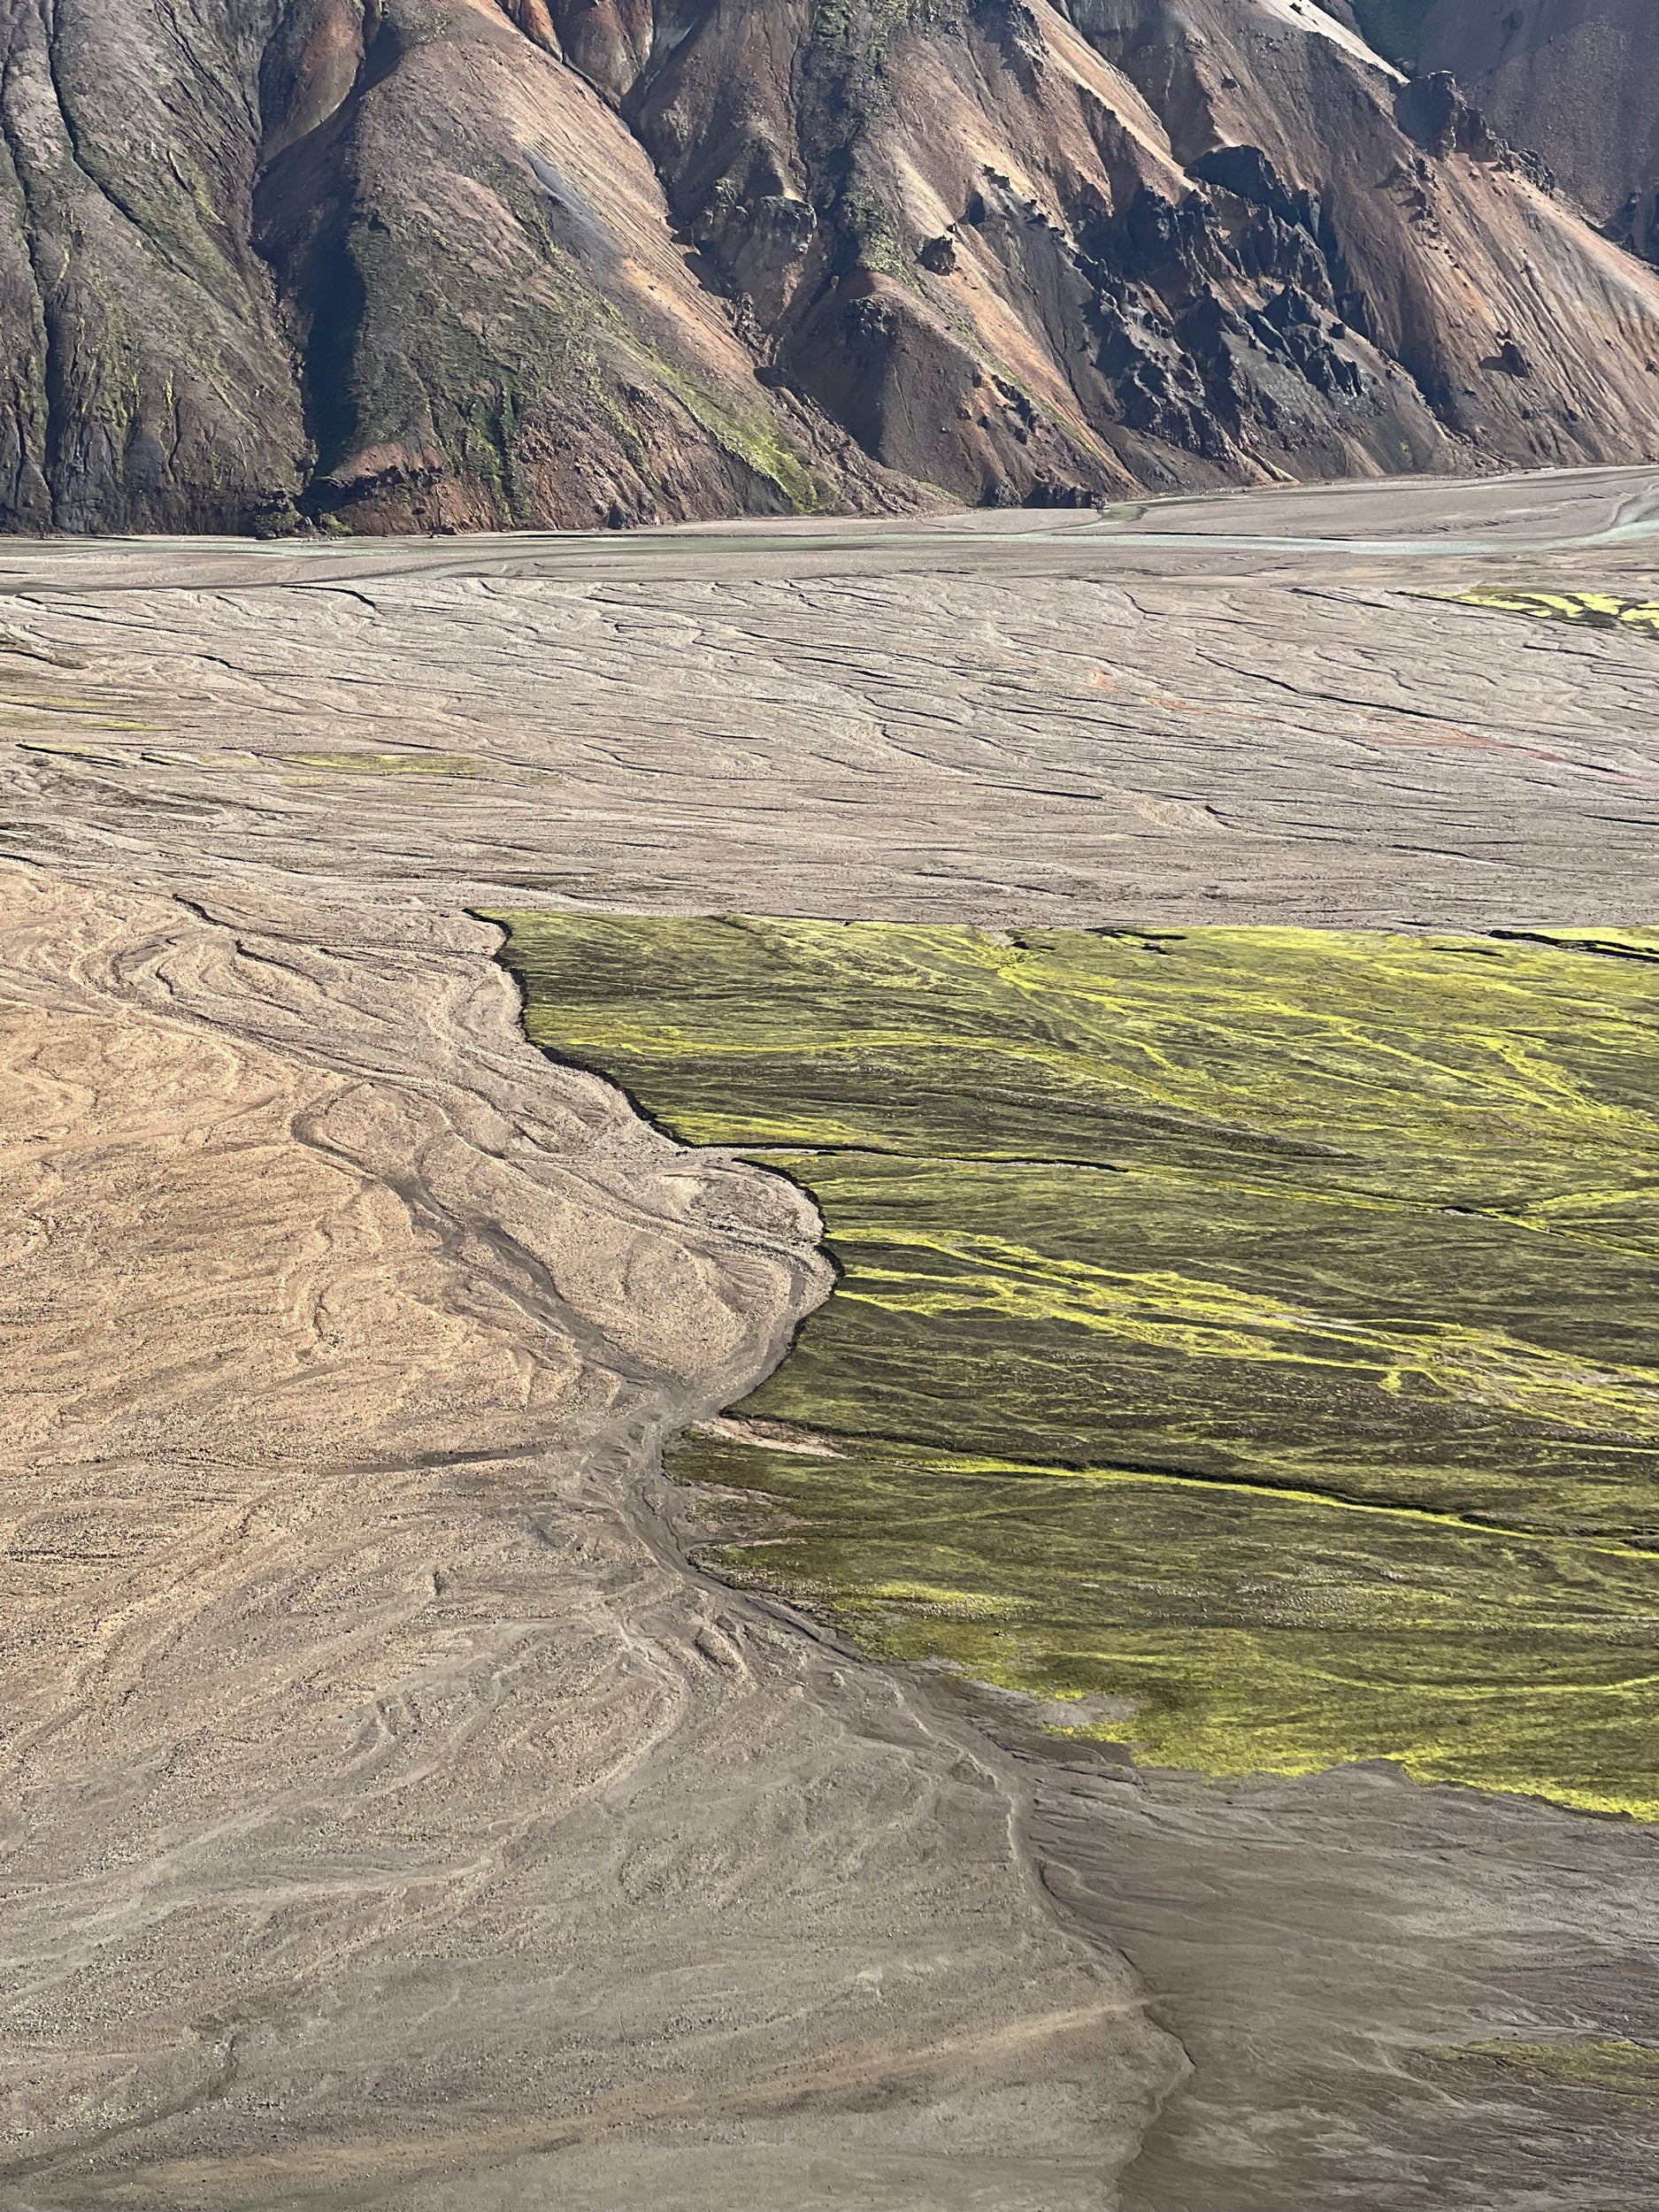 icelandic landscape in the highlands with veins of water and moss in a mountainous range